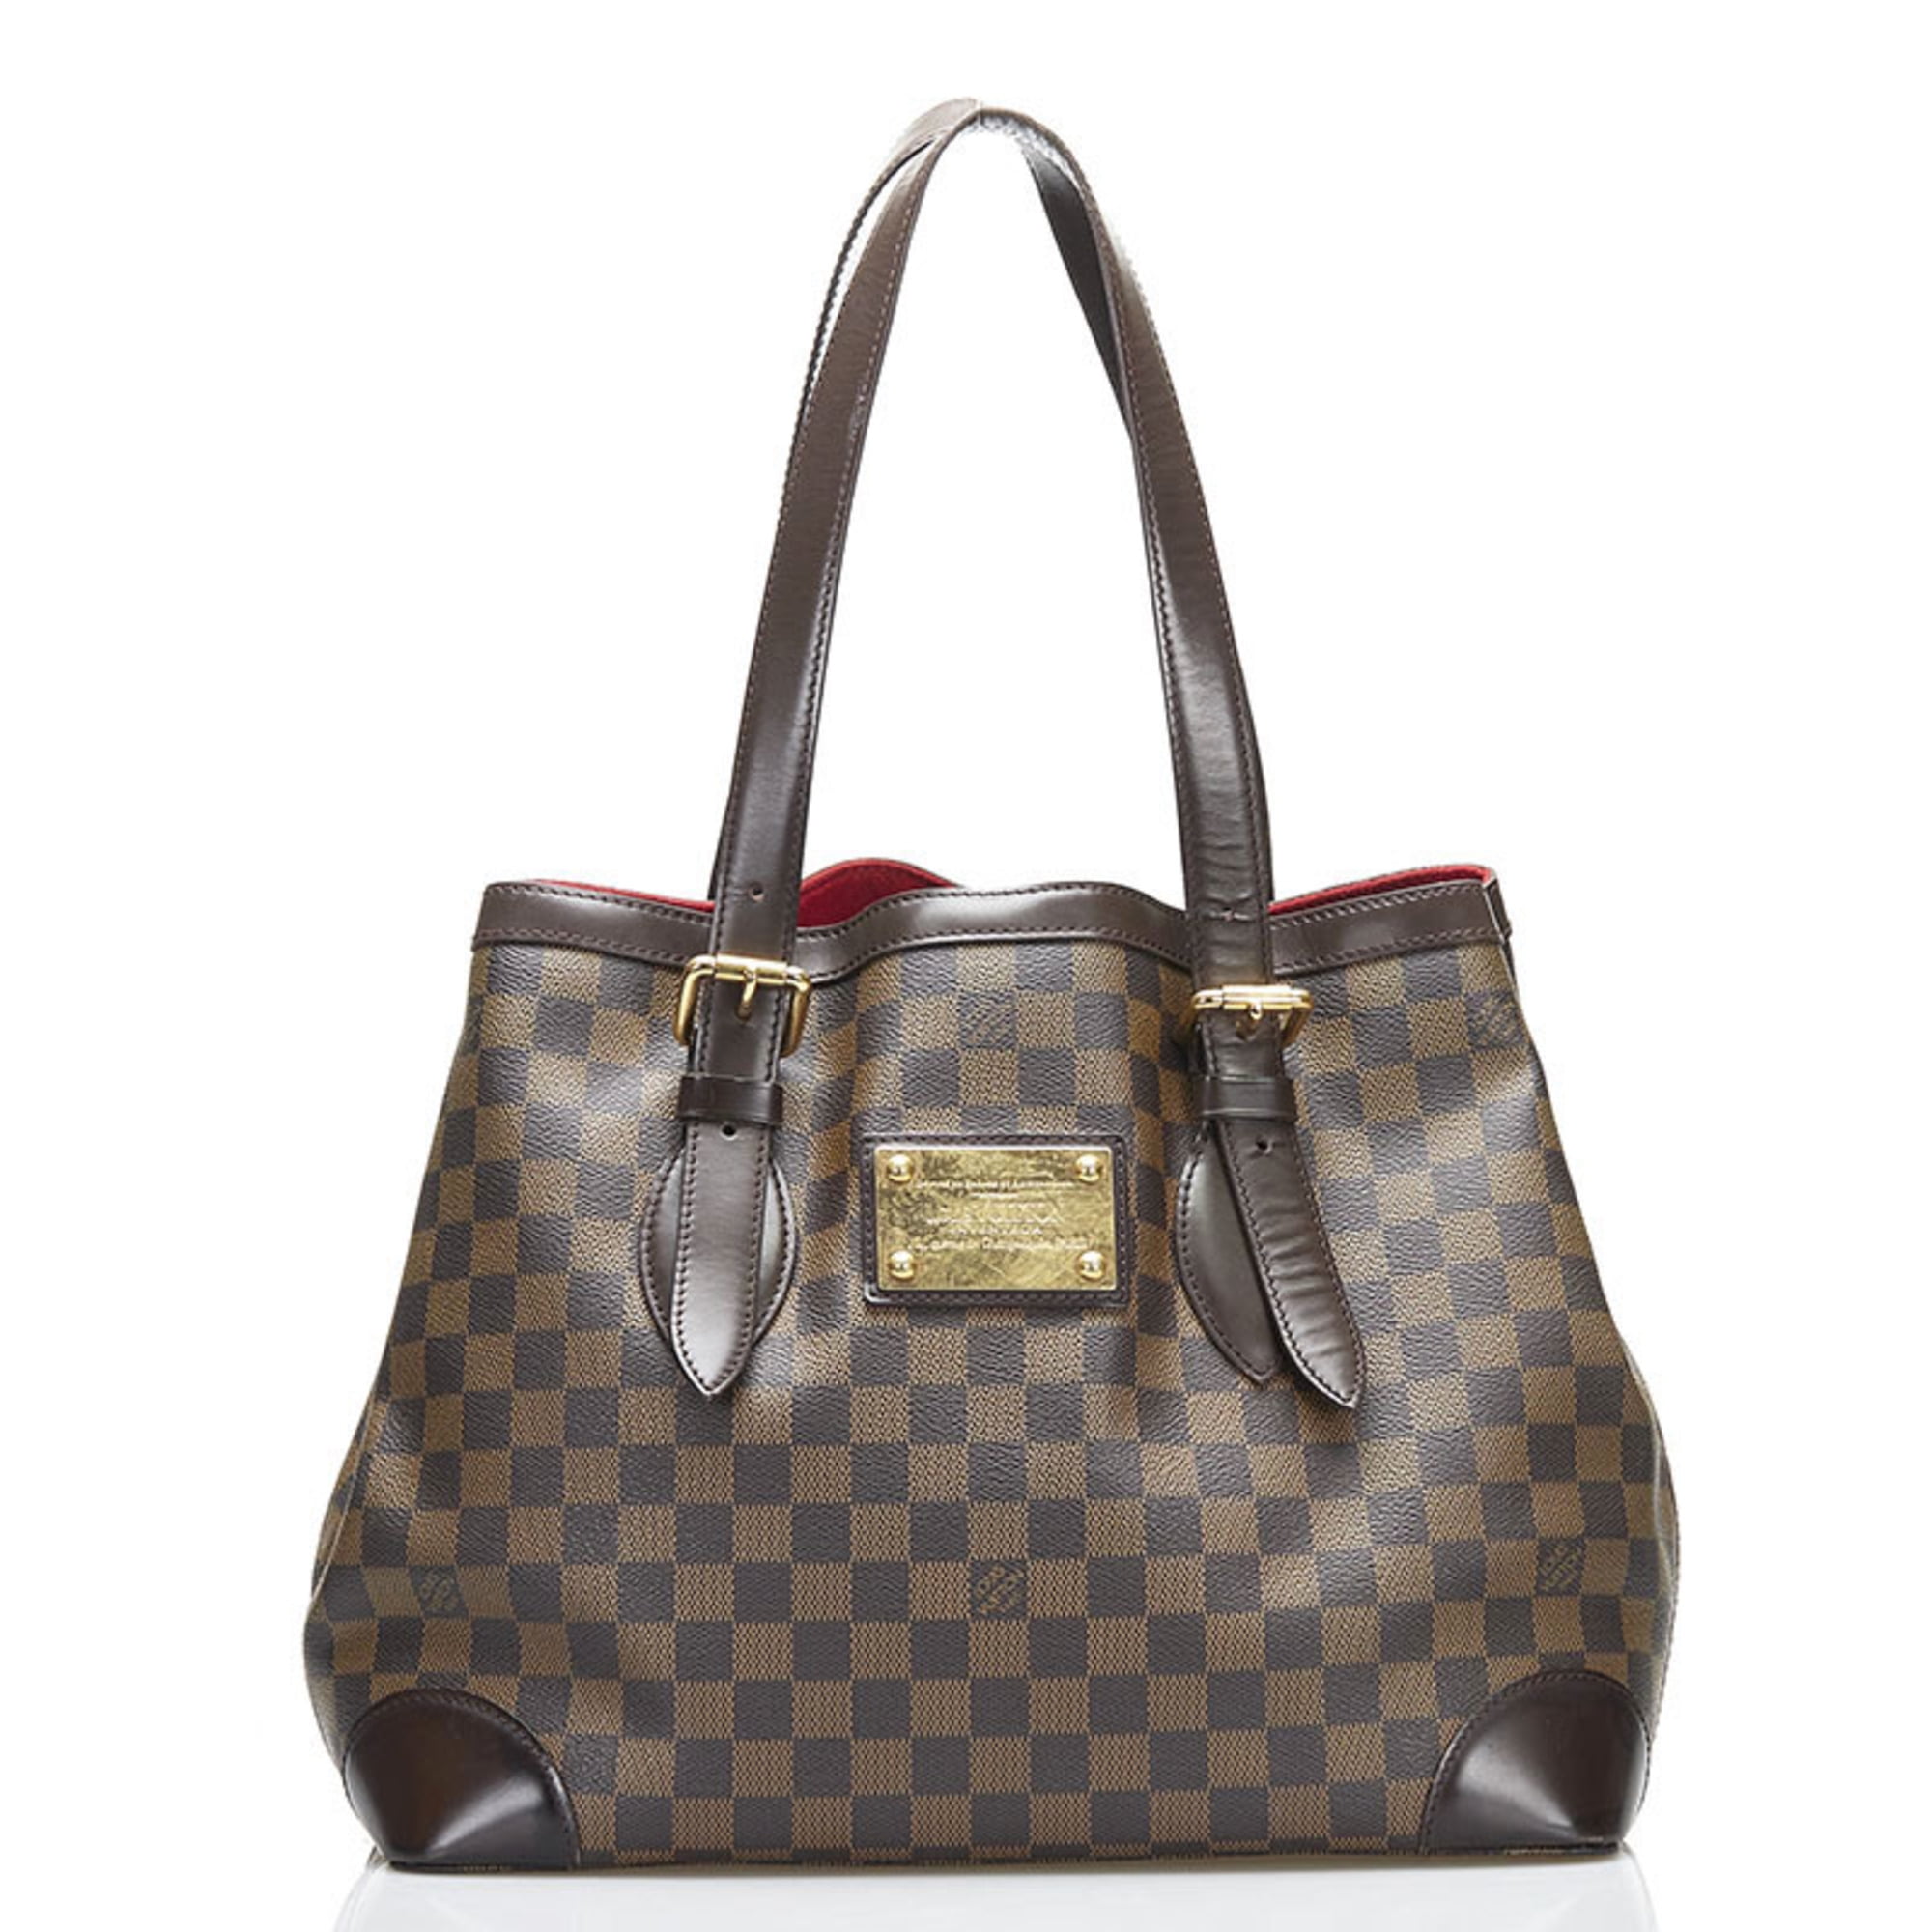 Louis Vuitton Hampstead Brown Canvas Tote Bag (Pre-Owned)